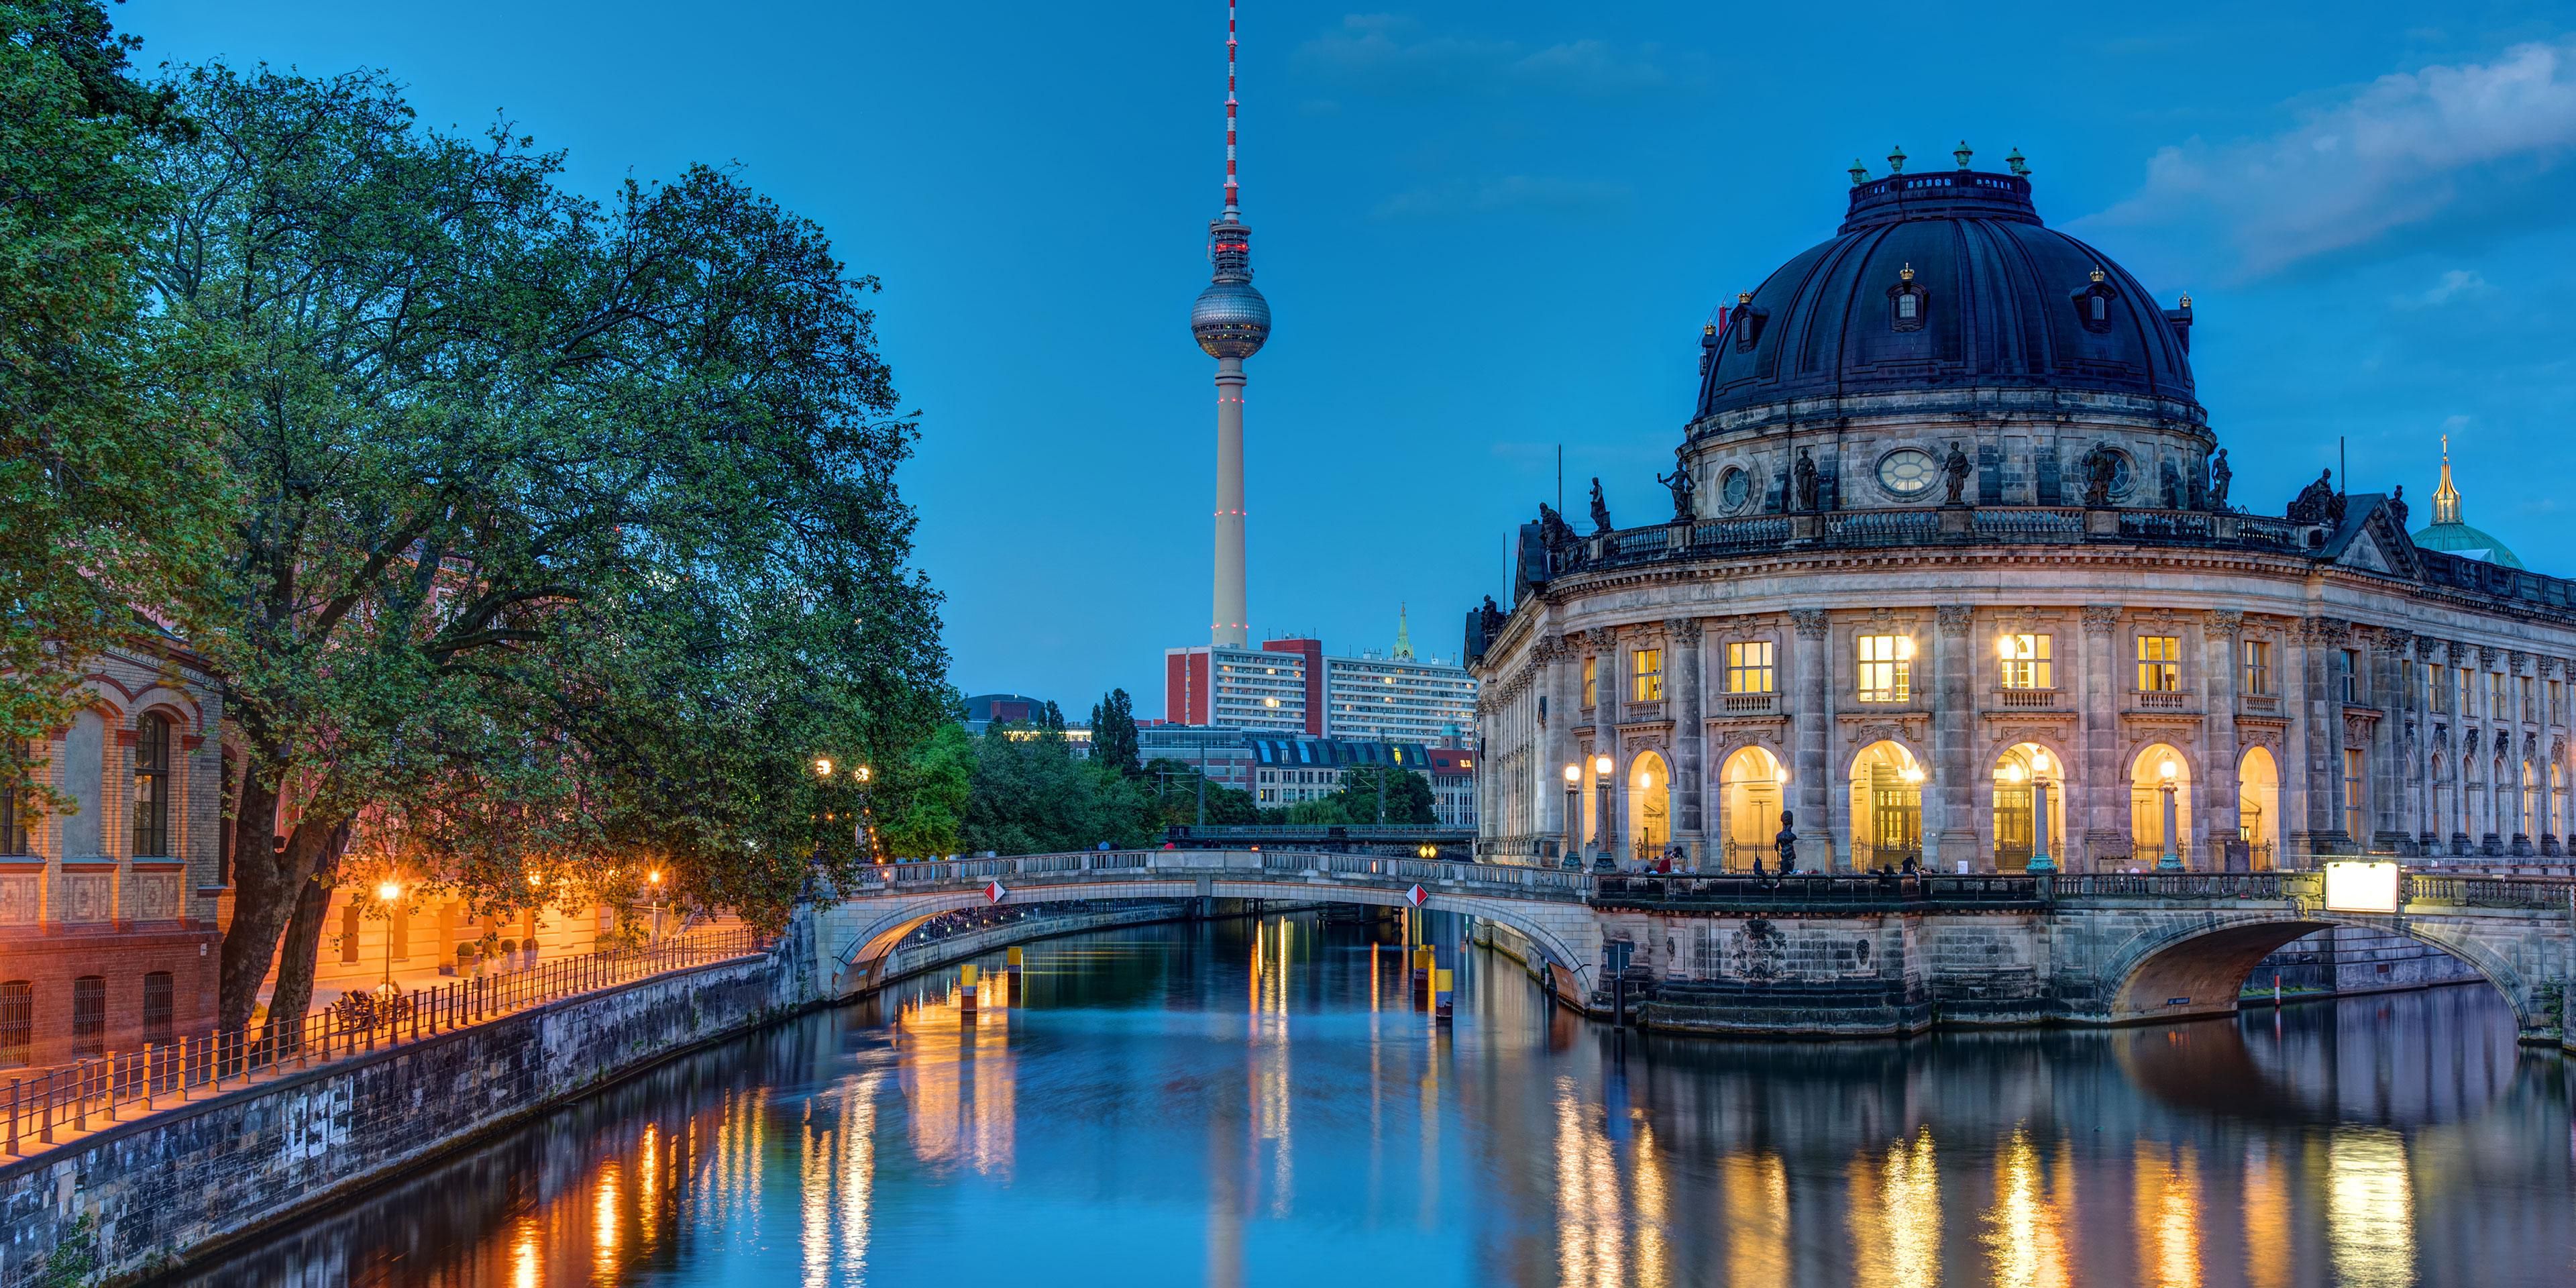 If you are a dedicated runner, there is no better place to run in Berlin than along the river Spree. Put your running shoes on and just a few steps from our hotel: ready, get set, go! You will run along the river with majestic views of Berlin’s cathedral, Museum Island, artisan stone masonry bridges, and vibrant parks.